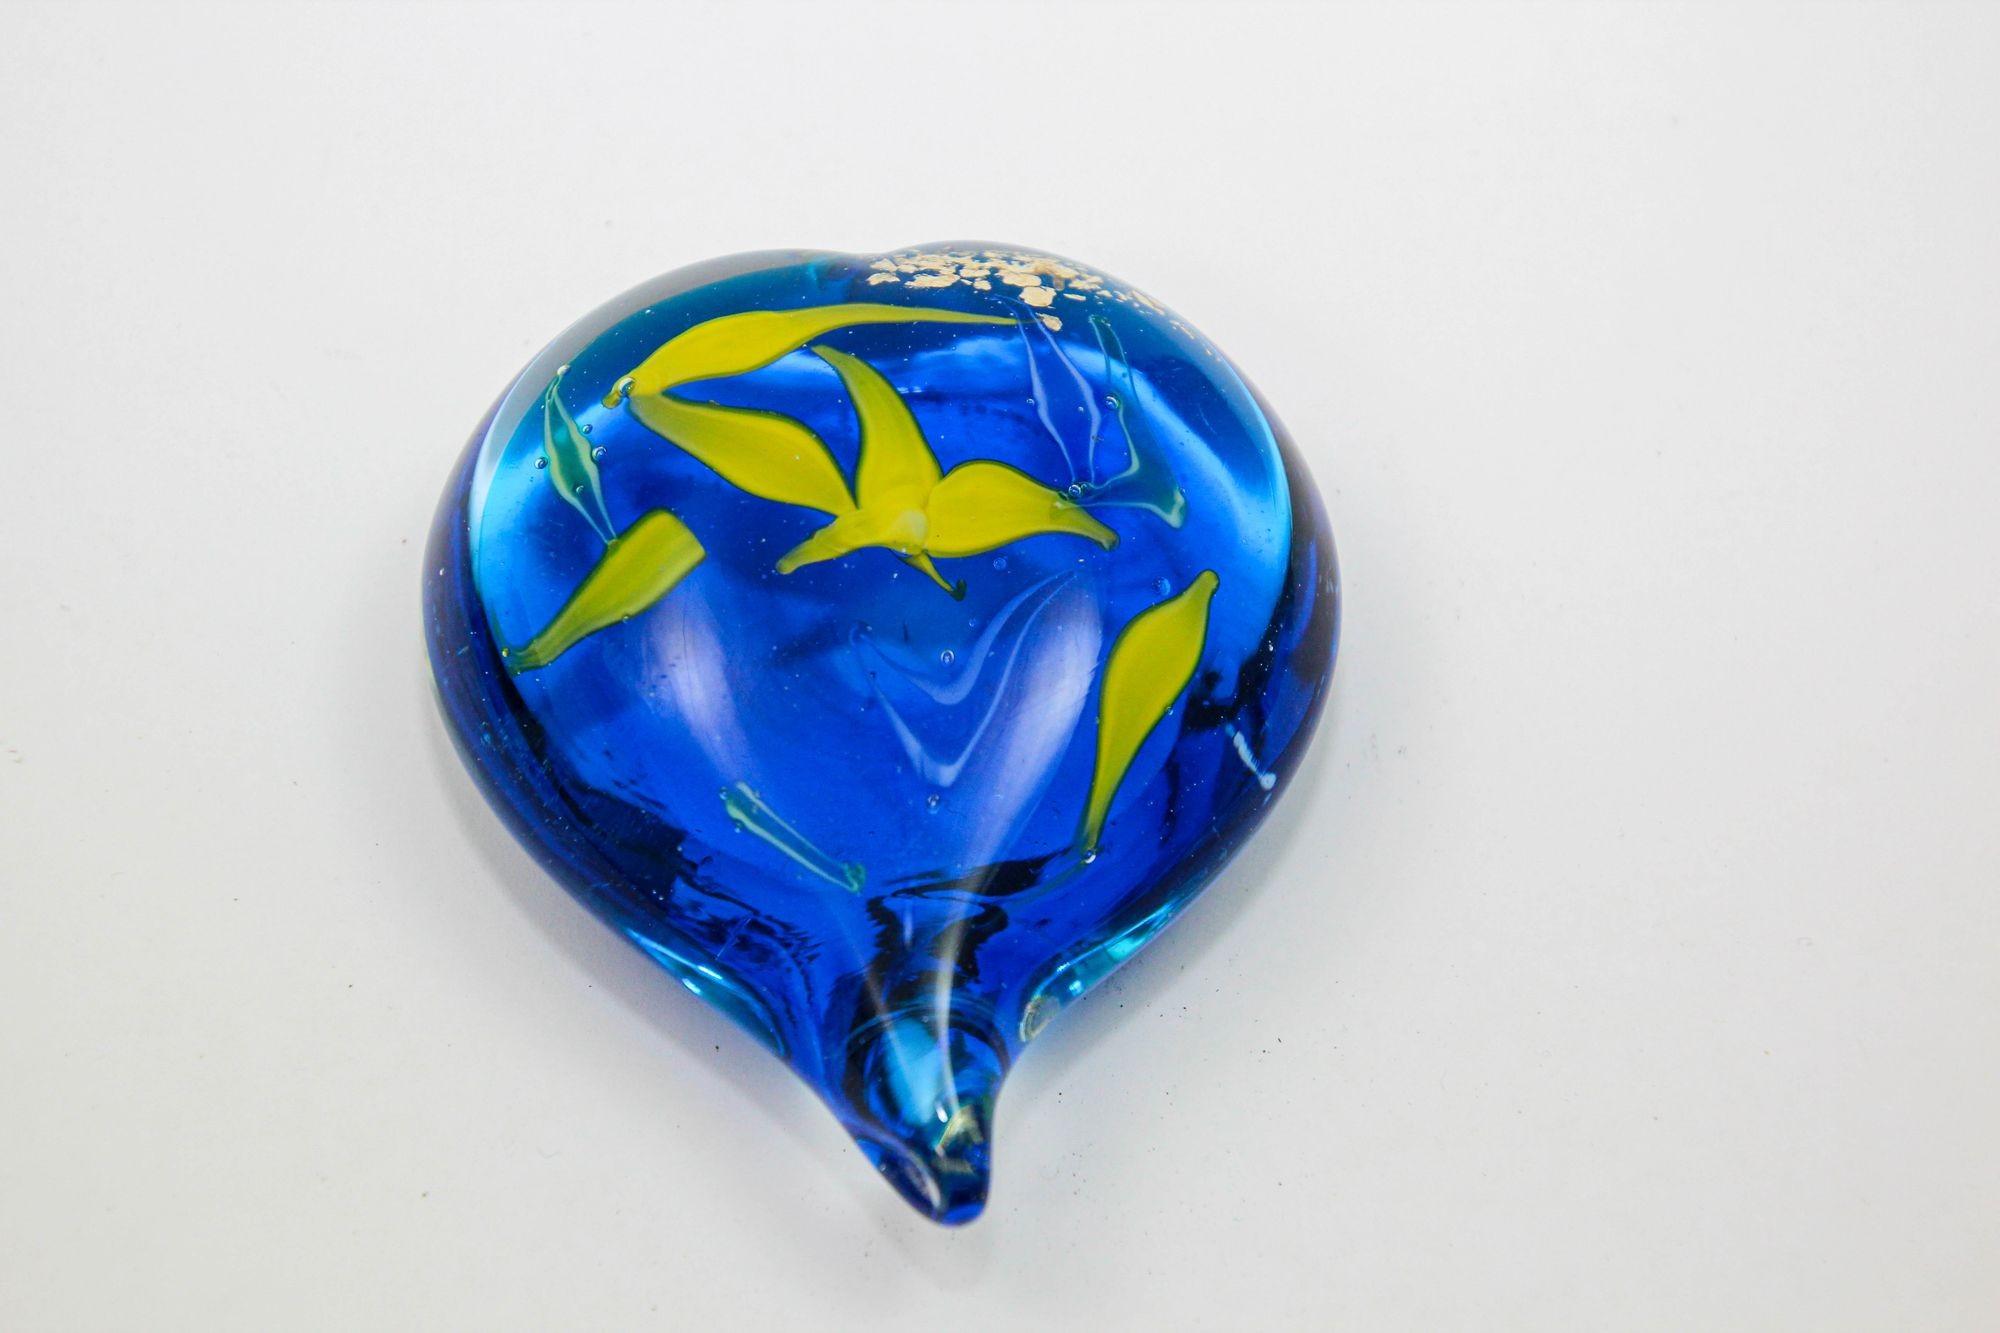 Murano Vintage Heart Shape Art Glass Paperweight Cobalt Blue, Yellow and Murine For Sale 2